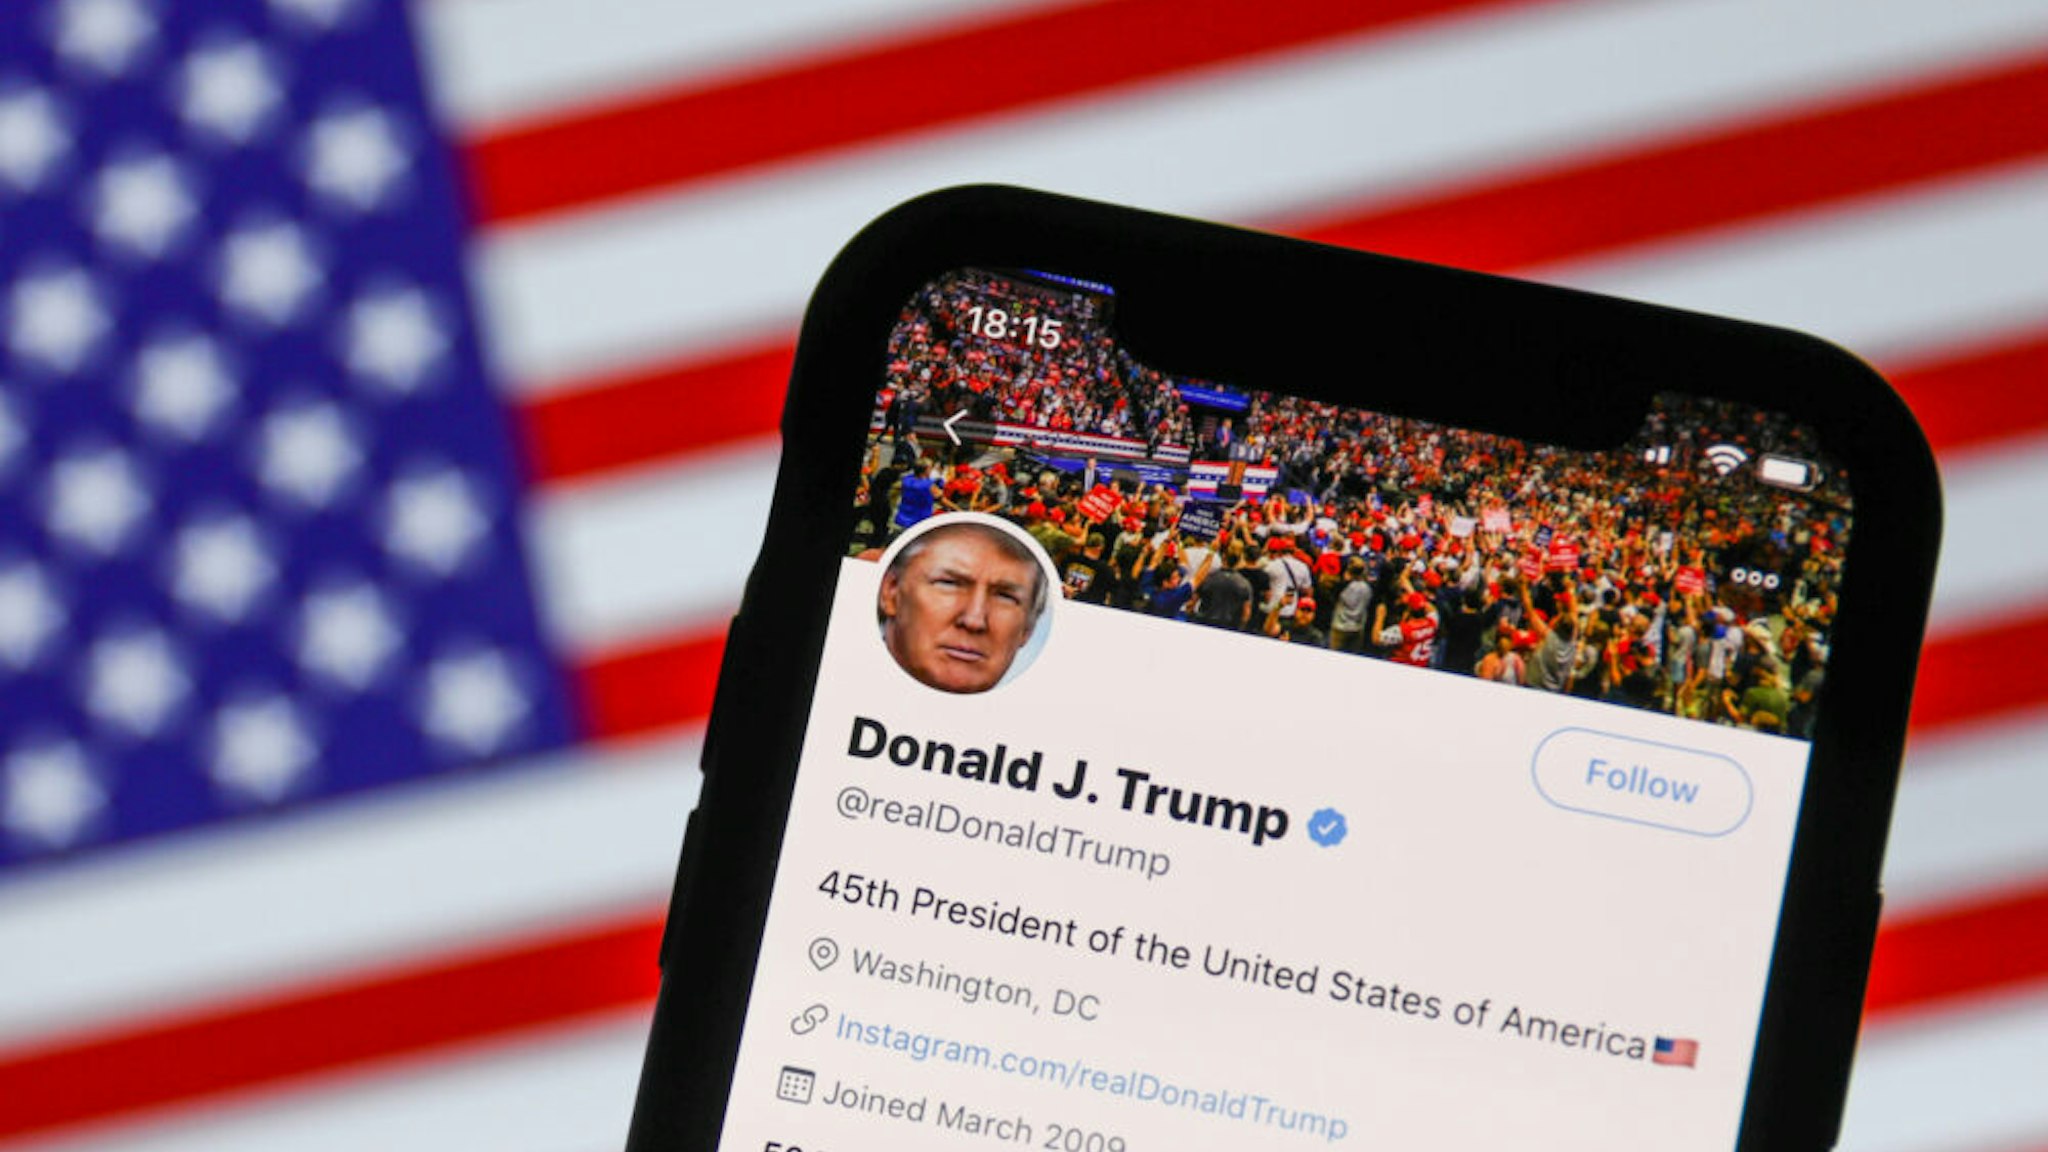 Twitter feed of the President of the USA Donald Trump is seen displayed on a phone screen with American flag in the background in this illustration photo taken on August 2, 2020. President of the USA Donald Trump said that Chinese app TikTok will be banned in the United States.